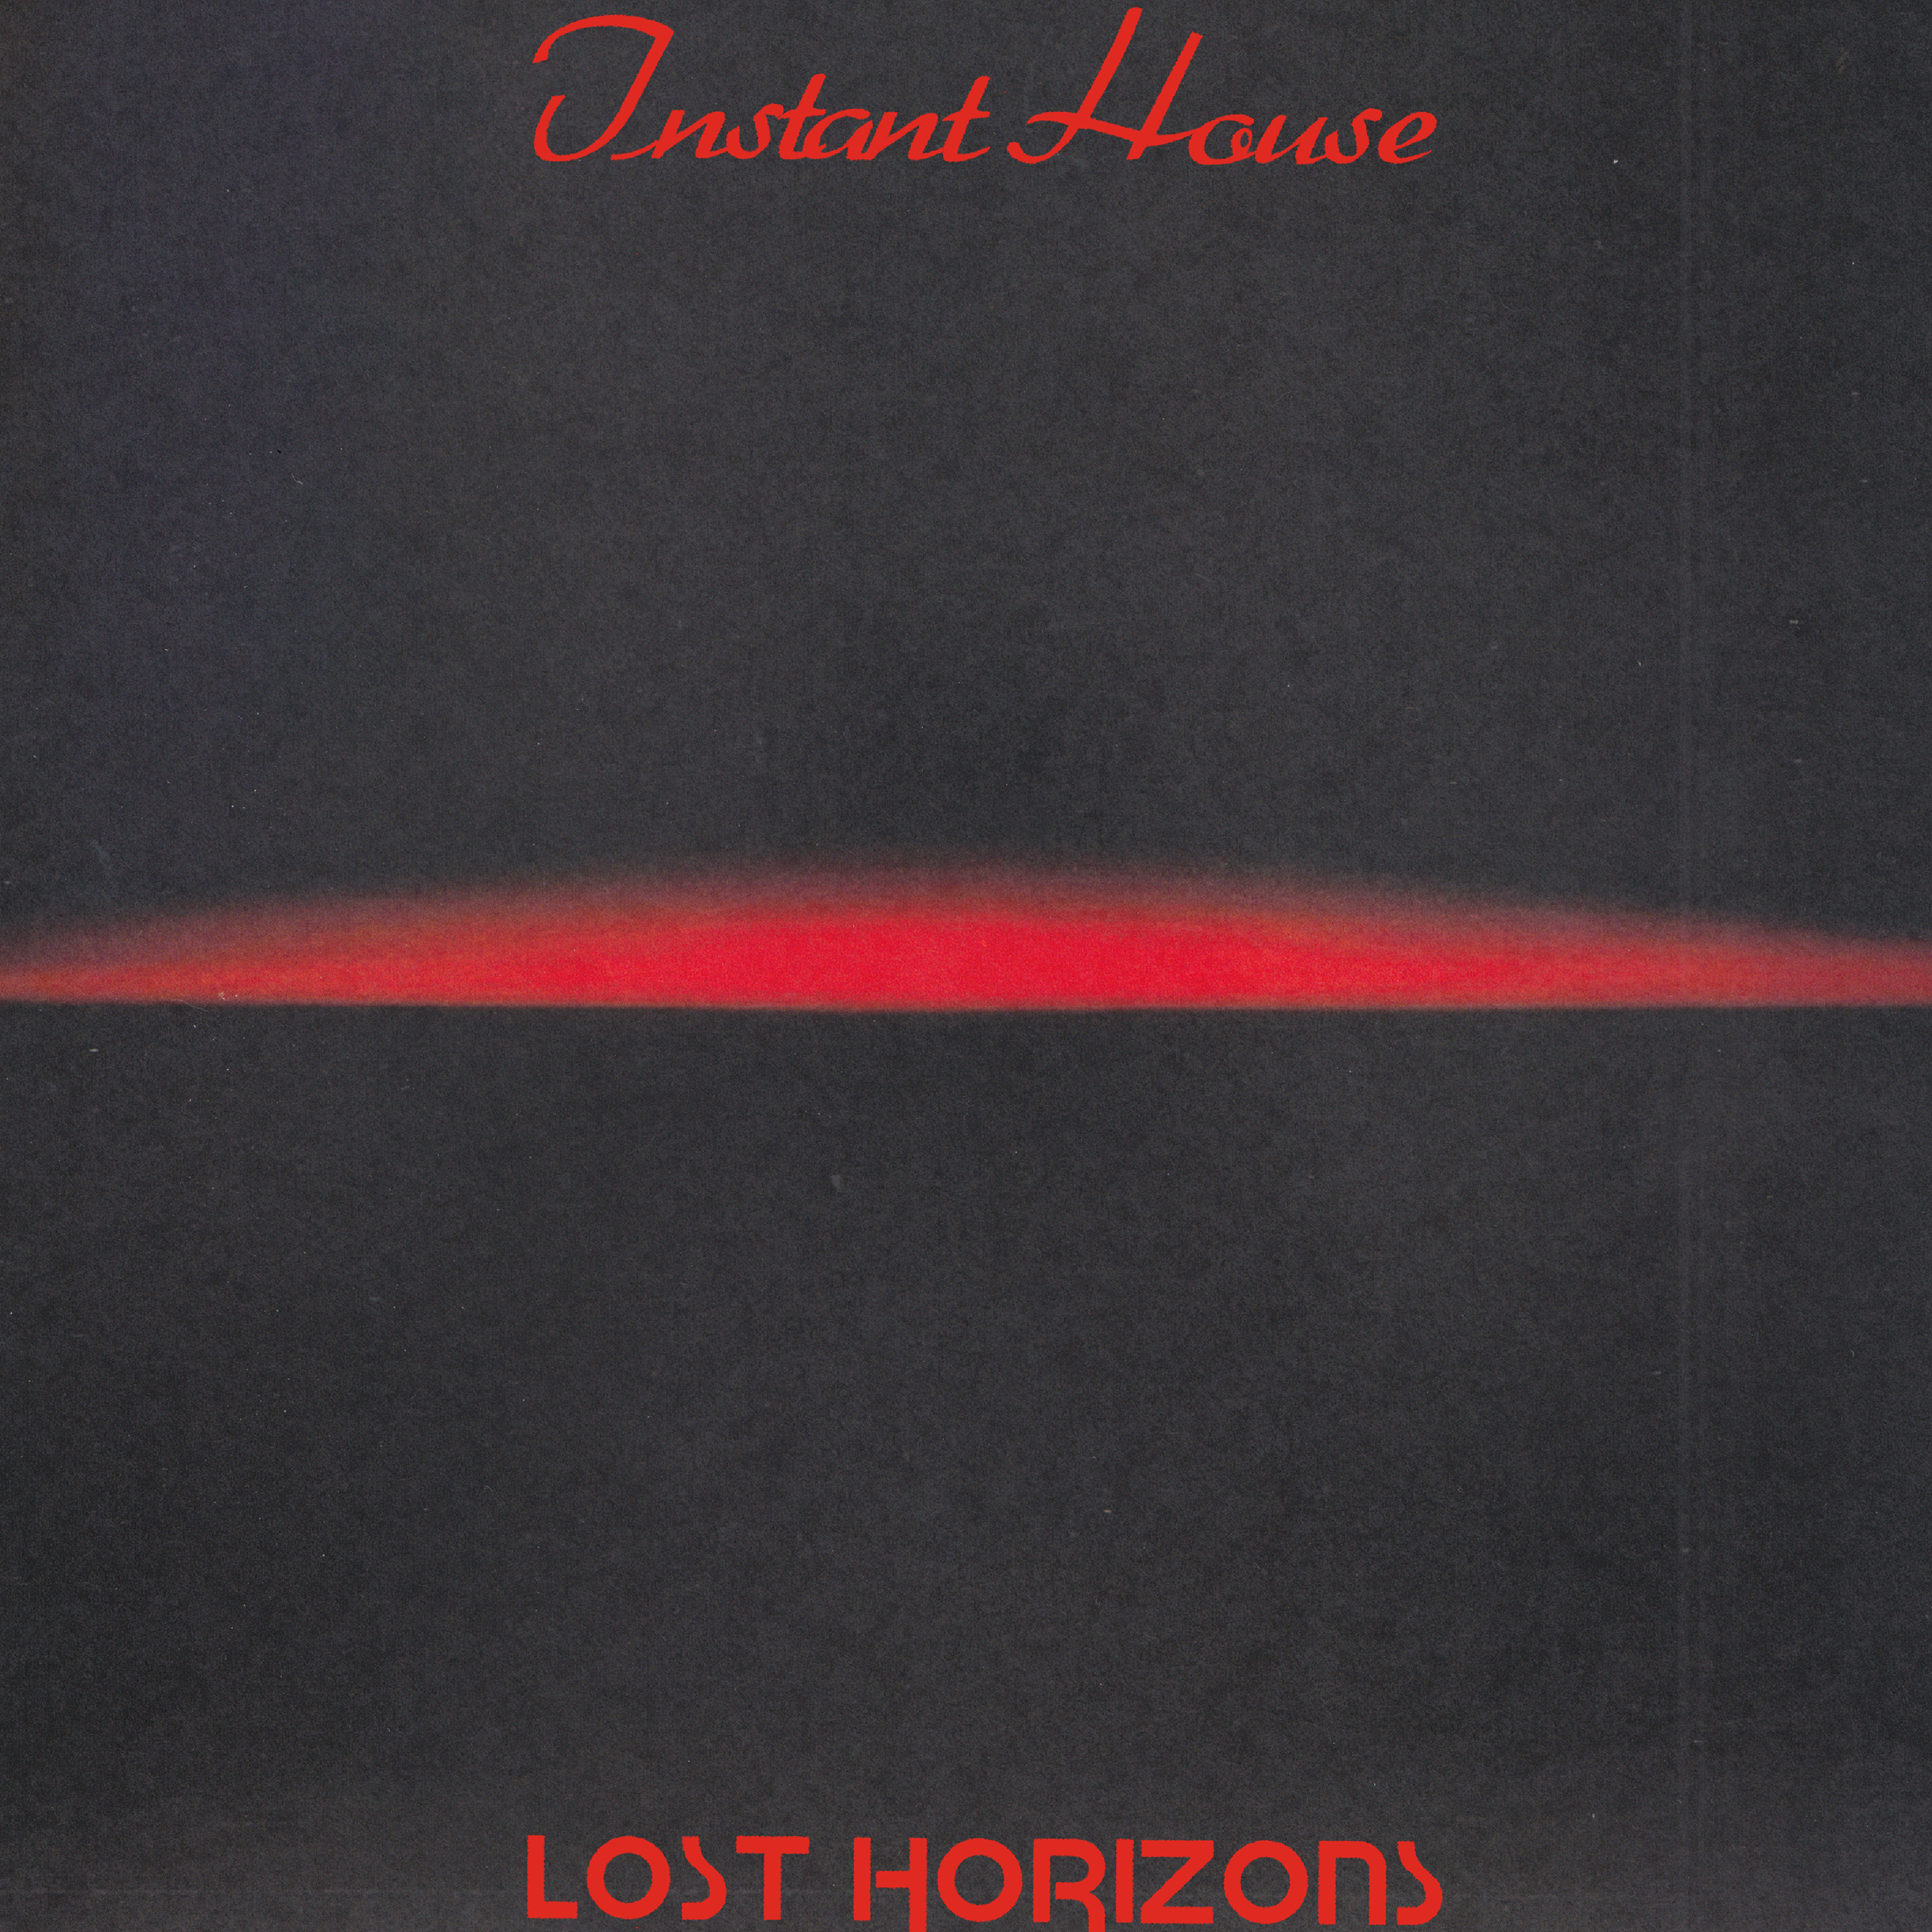 INSTANT HOUSE - Lost Horizons : 12inch